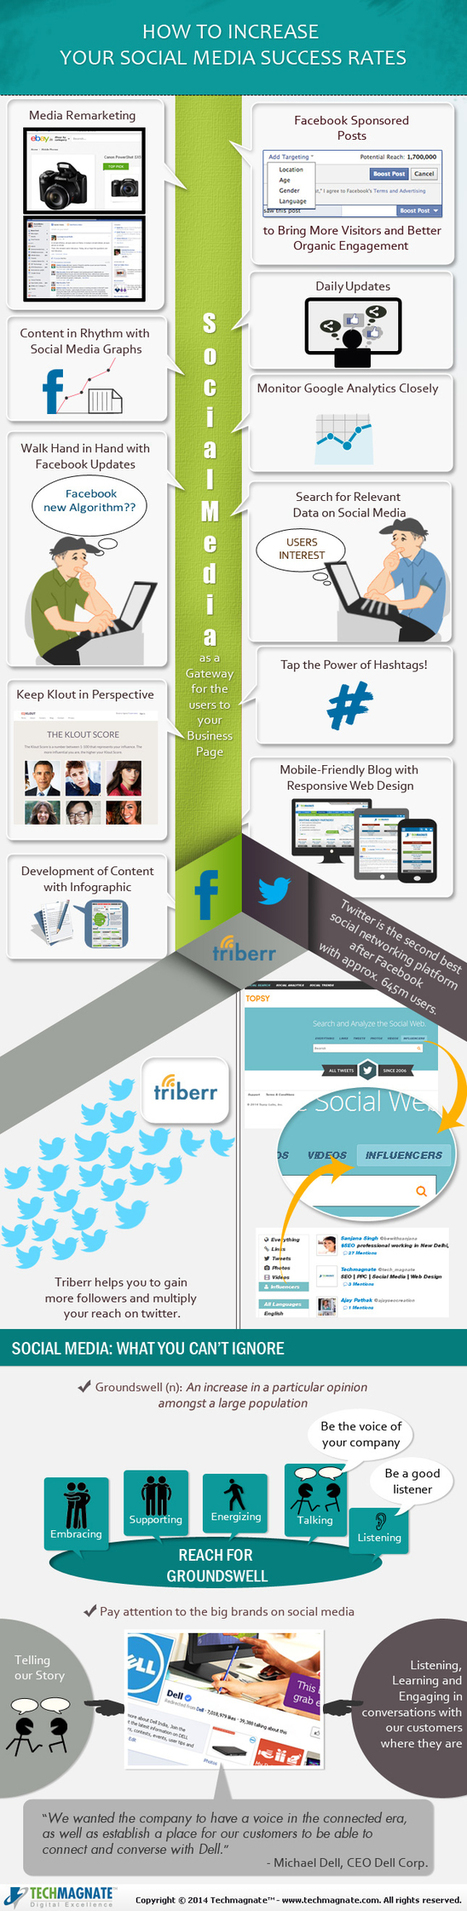 Social Media Infographic: How To Increase Your Success Rates? | E-Learning-Inclusivo (Mashup) | Scoop.it